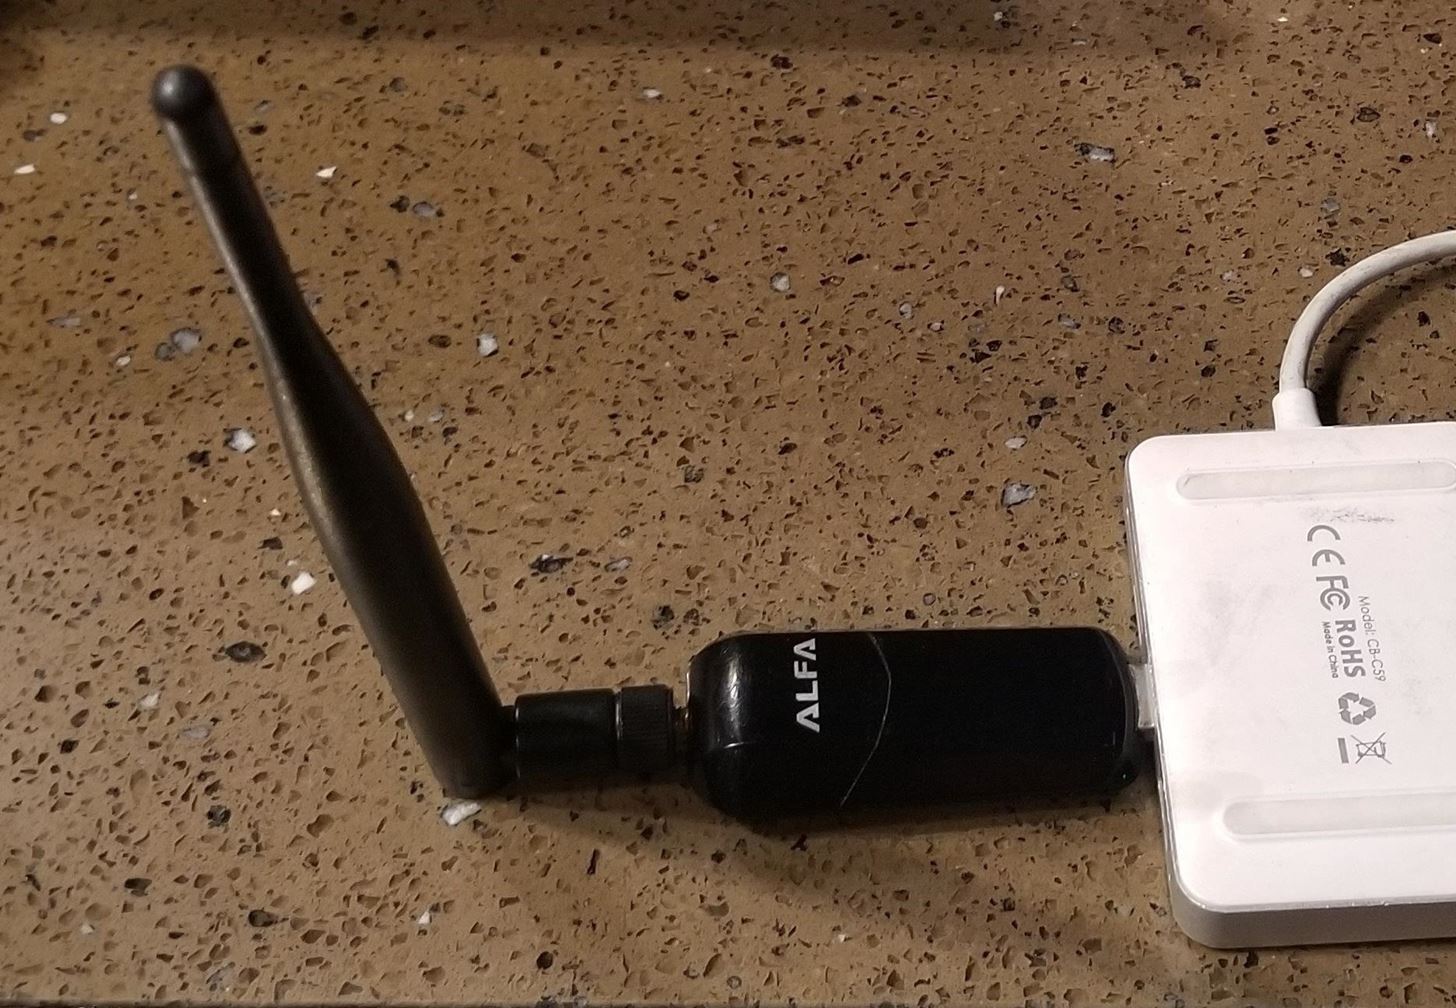 How to Pick an Antenna for Wi-Fi Hacking